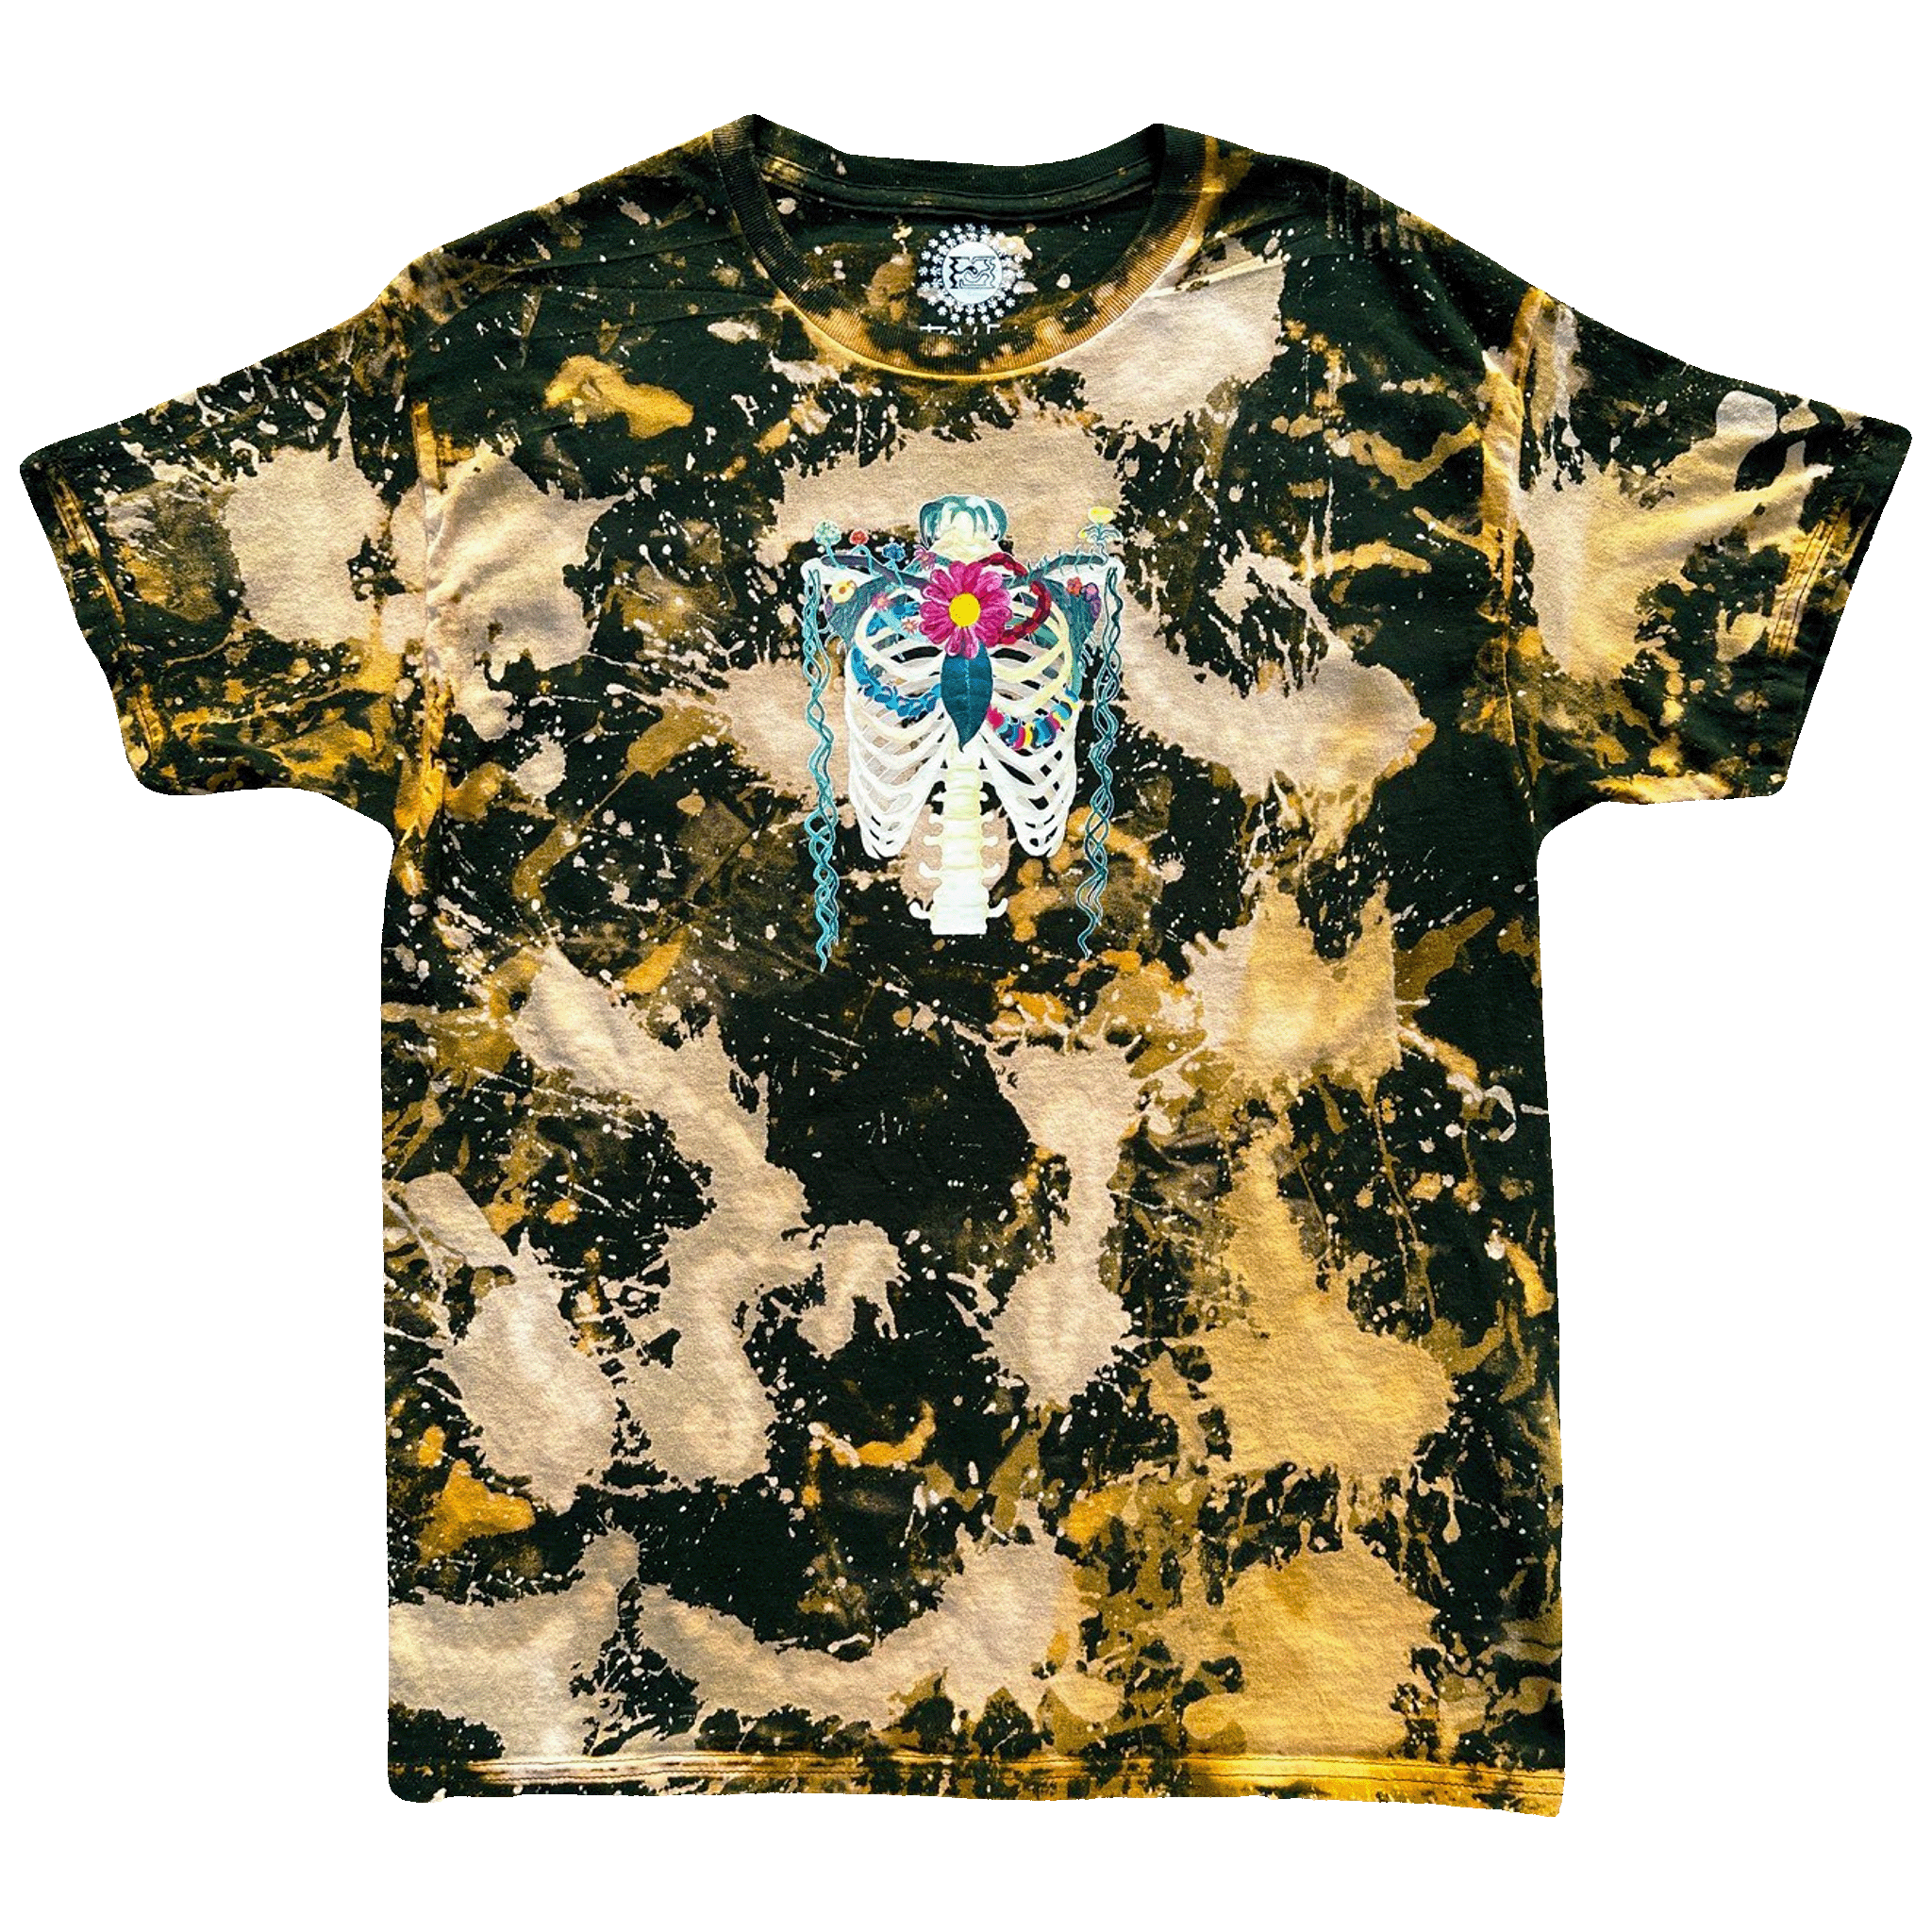 Breath of Life Green Bleached Shirt